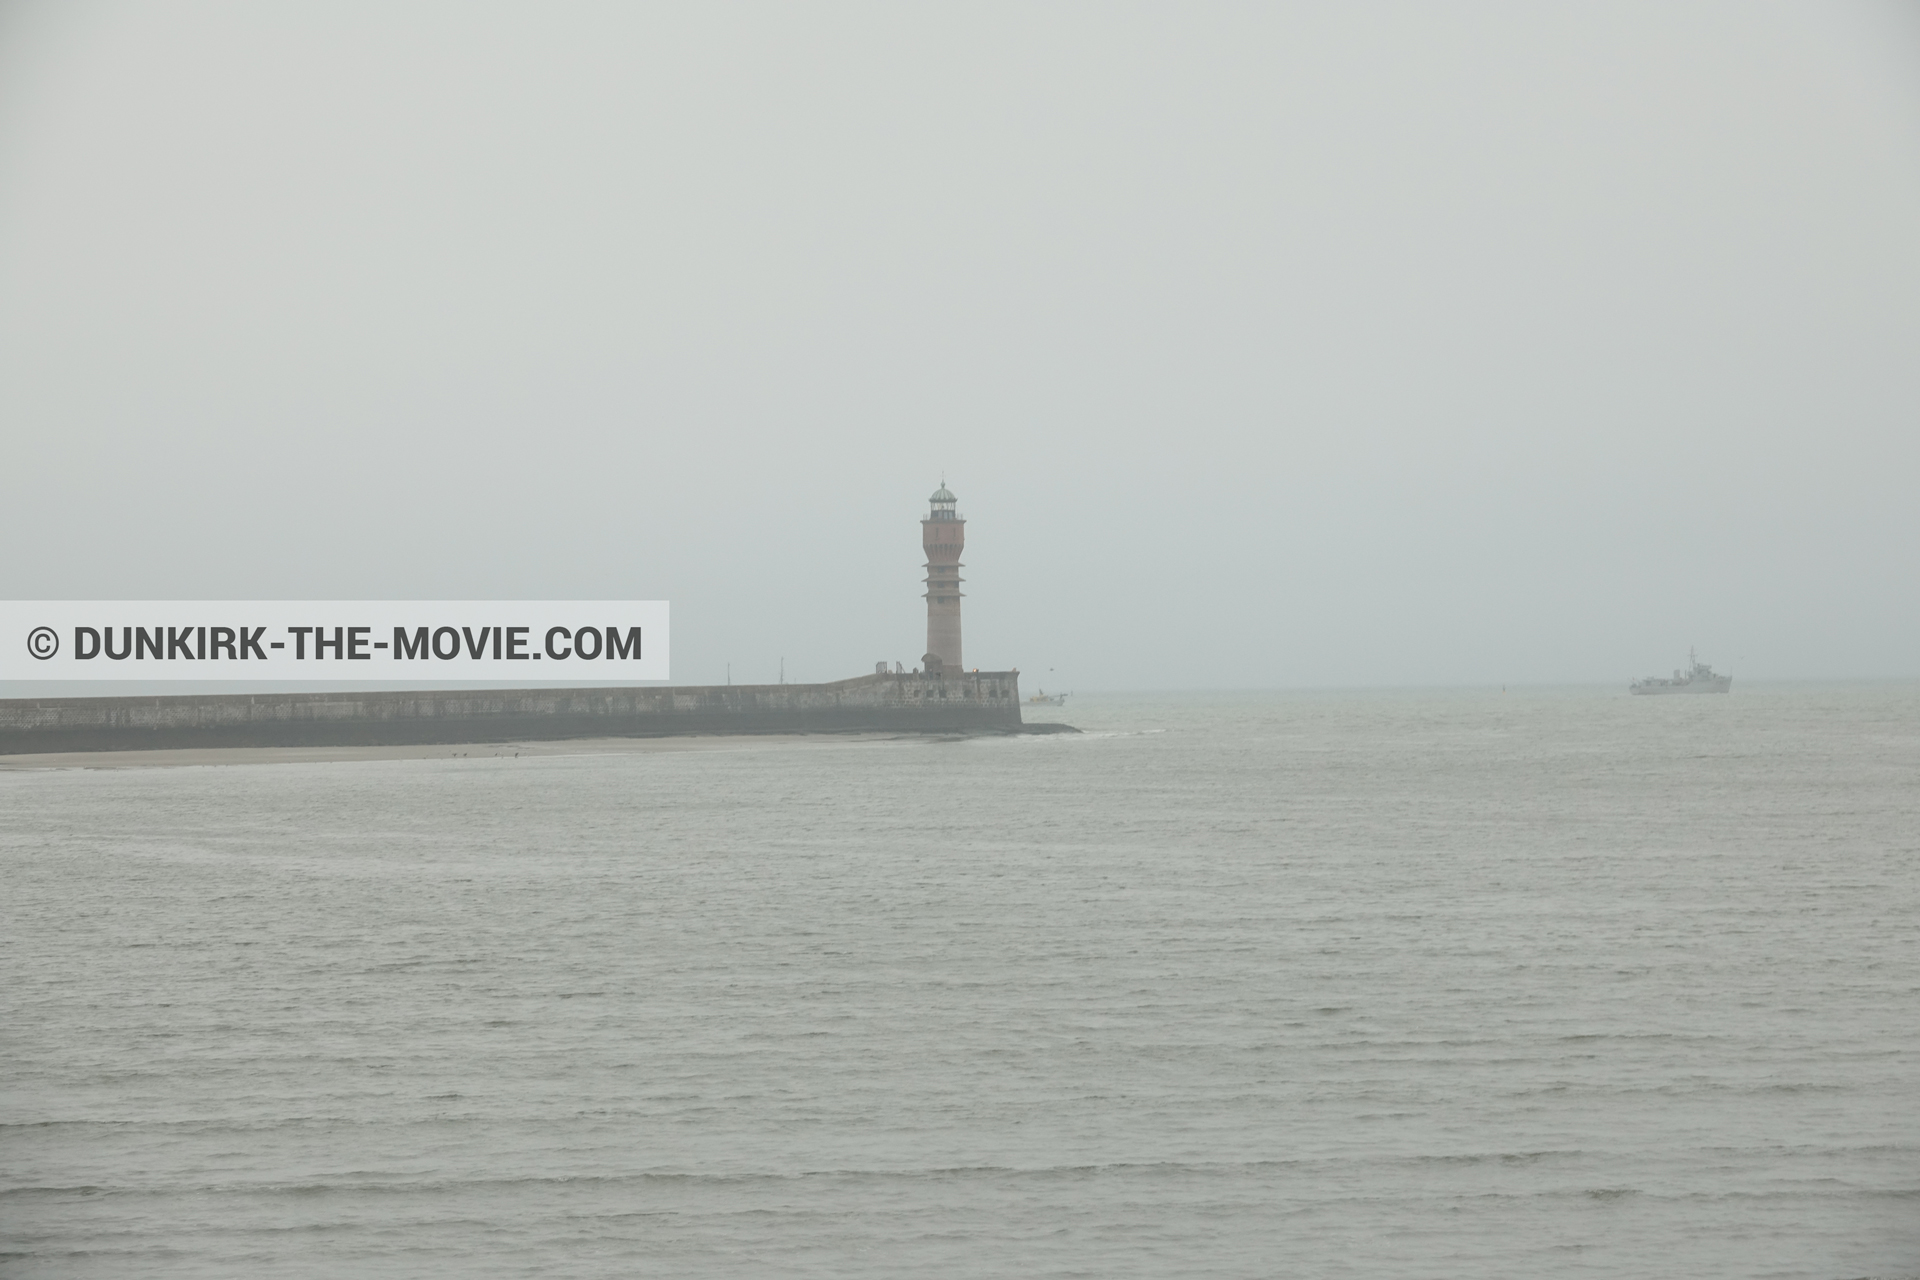 Picture with boat, grey sky, calm sea, St Pol sur Mer lighthouse,  from behind the scene of the Dunkirk movie by Nolan